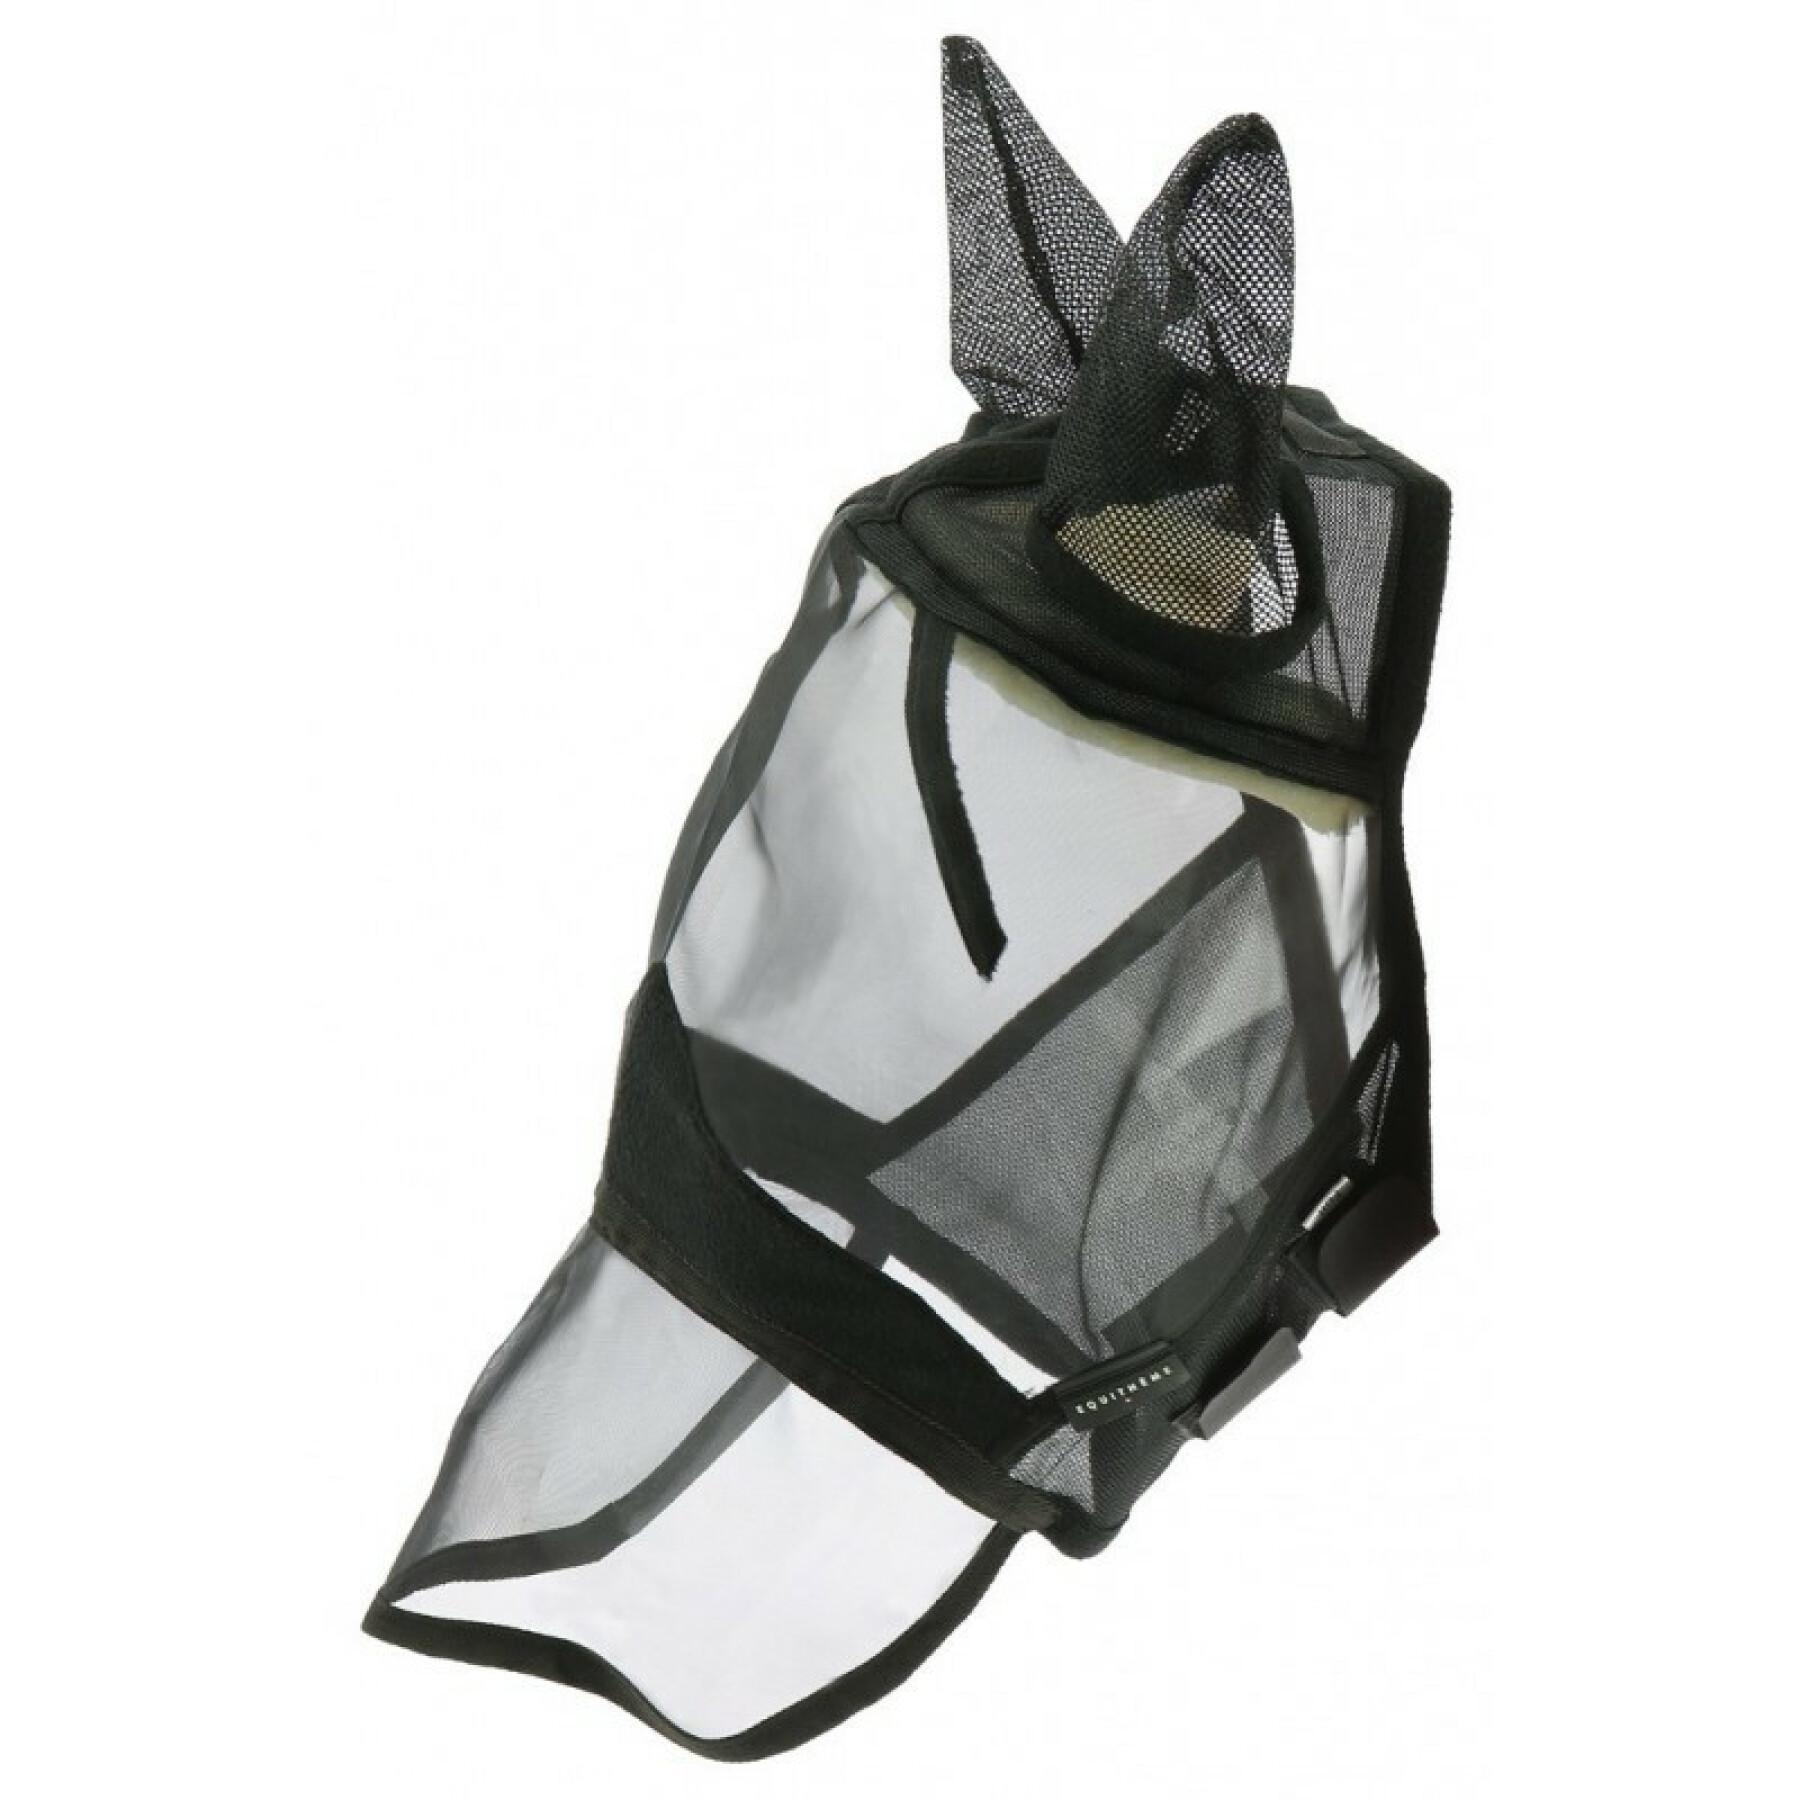 Anti-fly mask for horses Equithème Confort